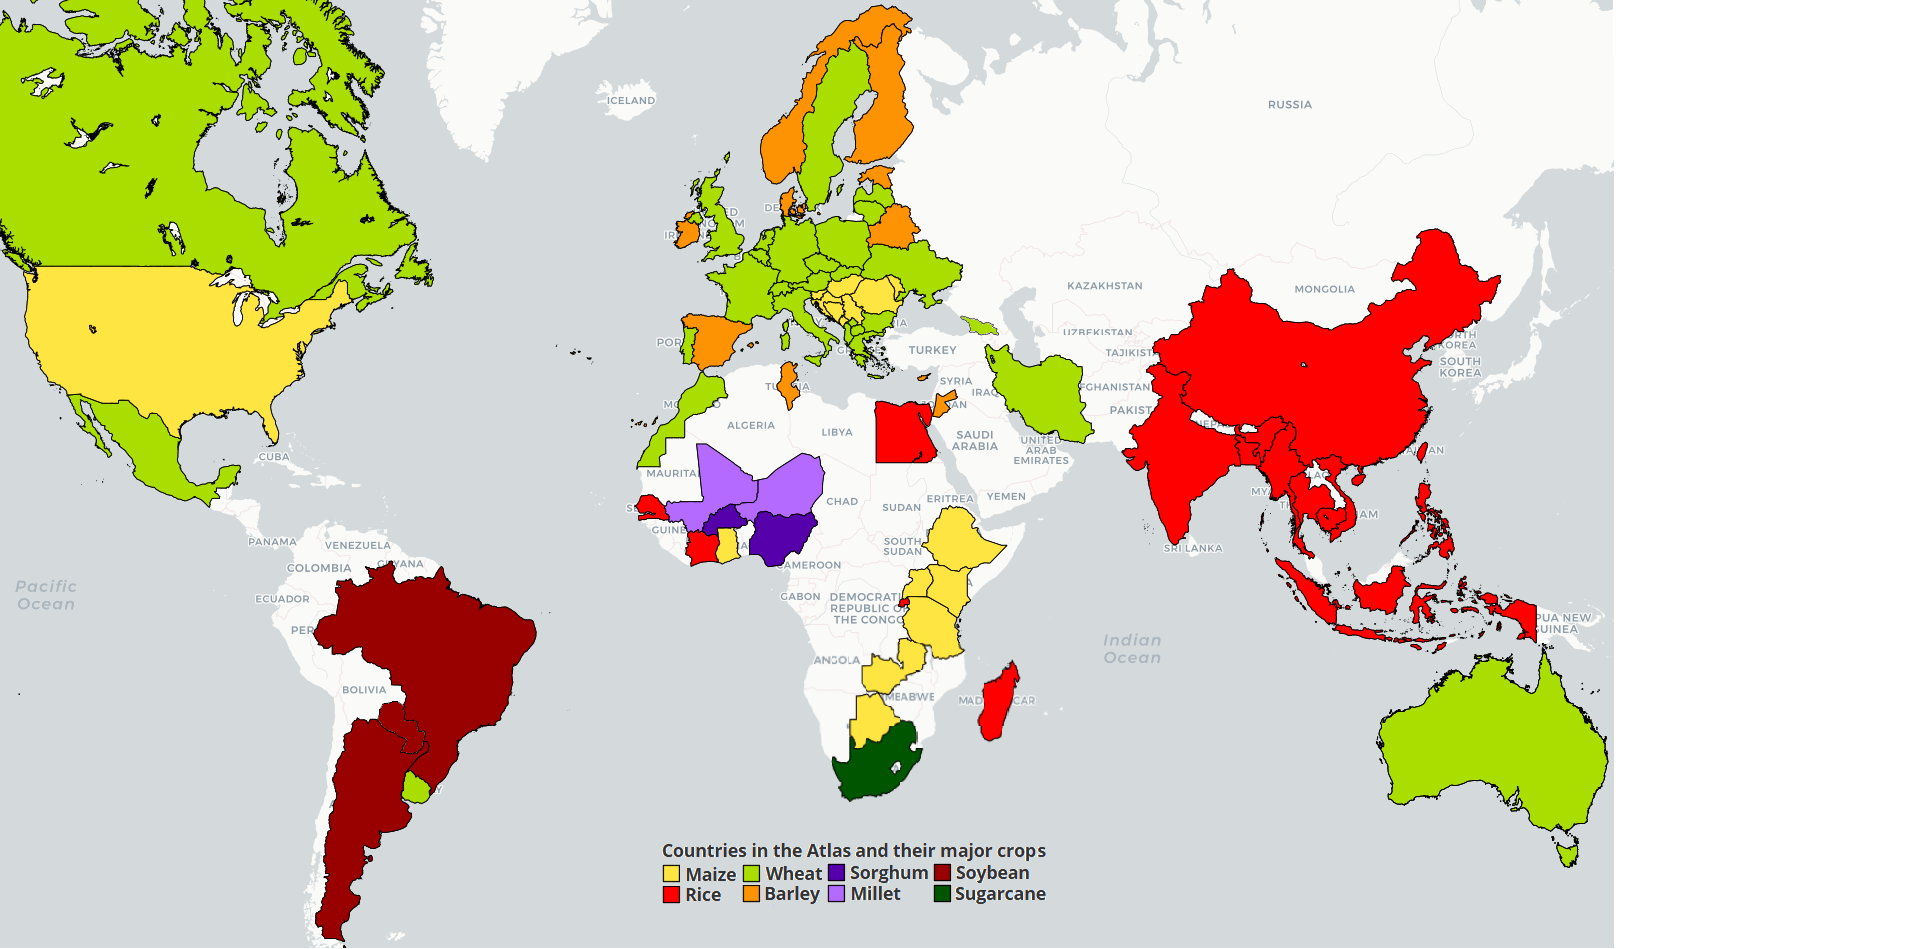 World map showing the countries for which there is information on yield gaps 